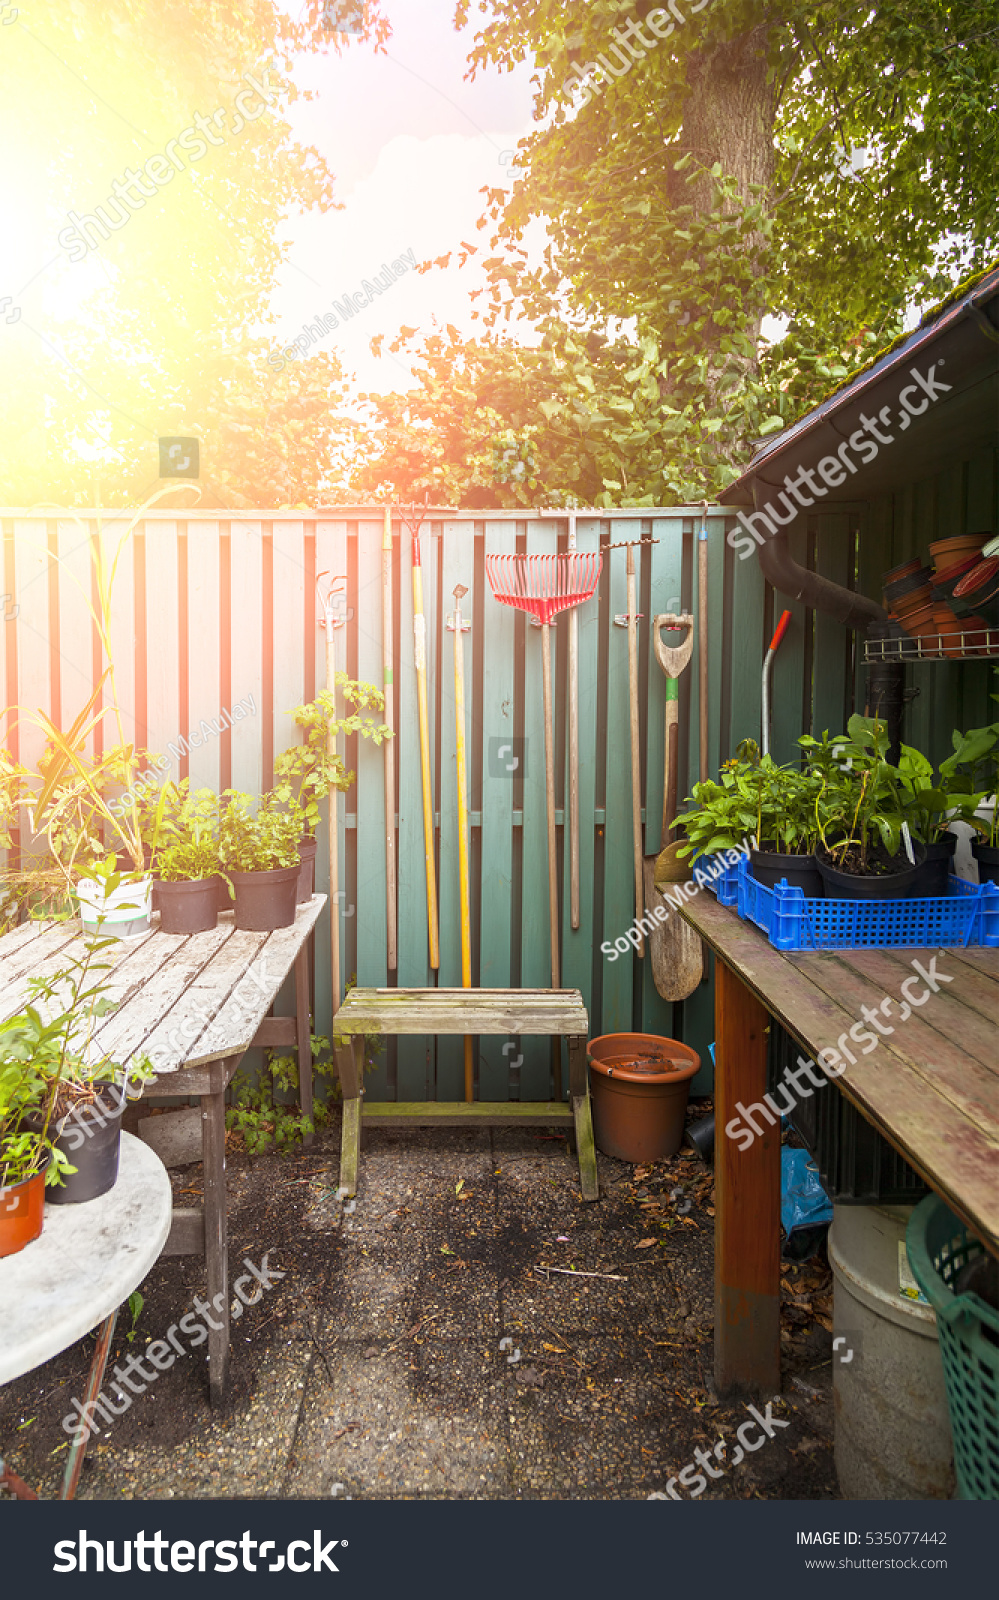 Image of garden potting table #535077442